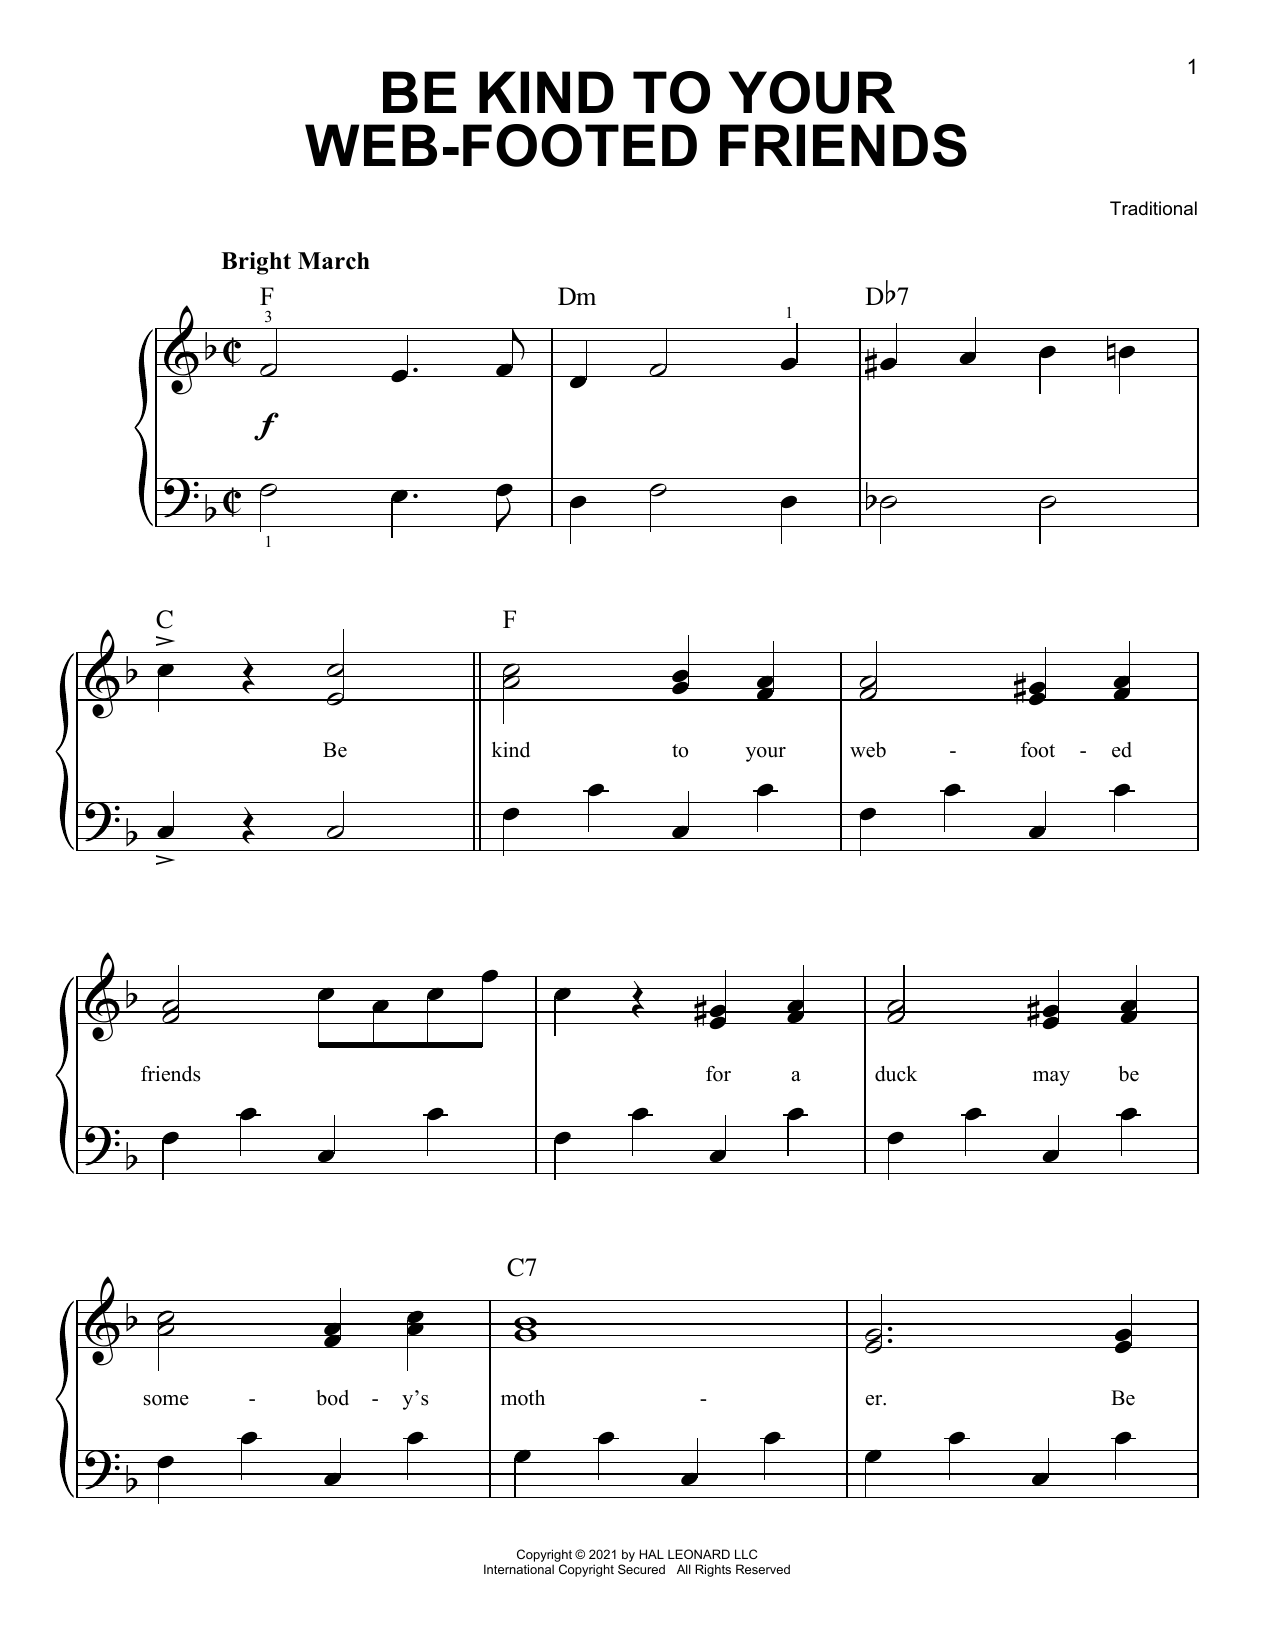 Download Traditional Be Kind To Your Web-Footed Friends Sheet Music